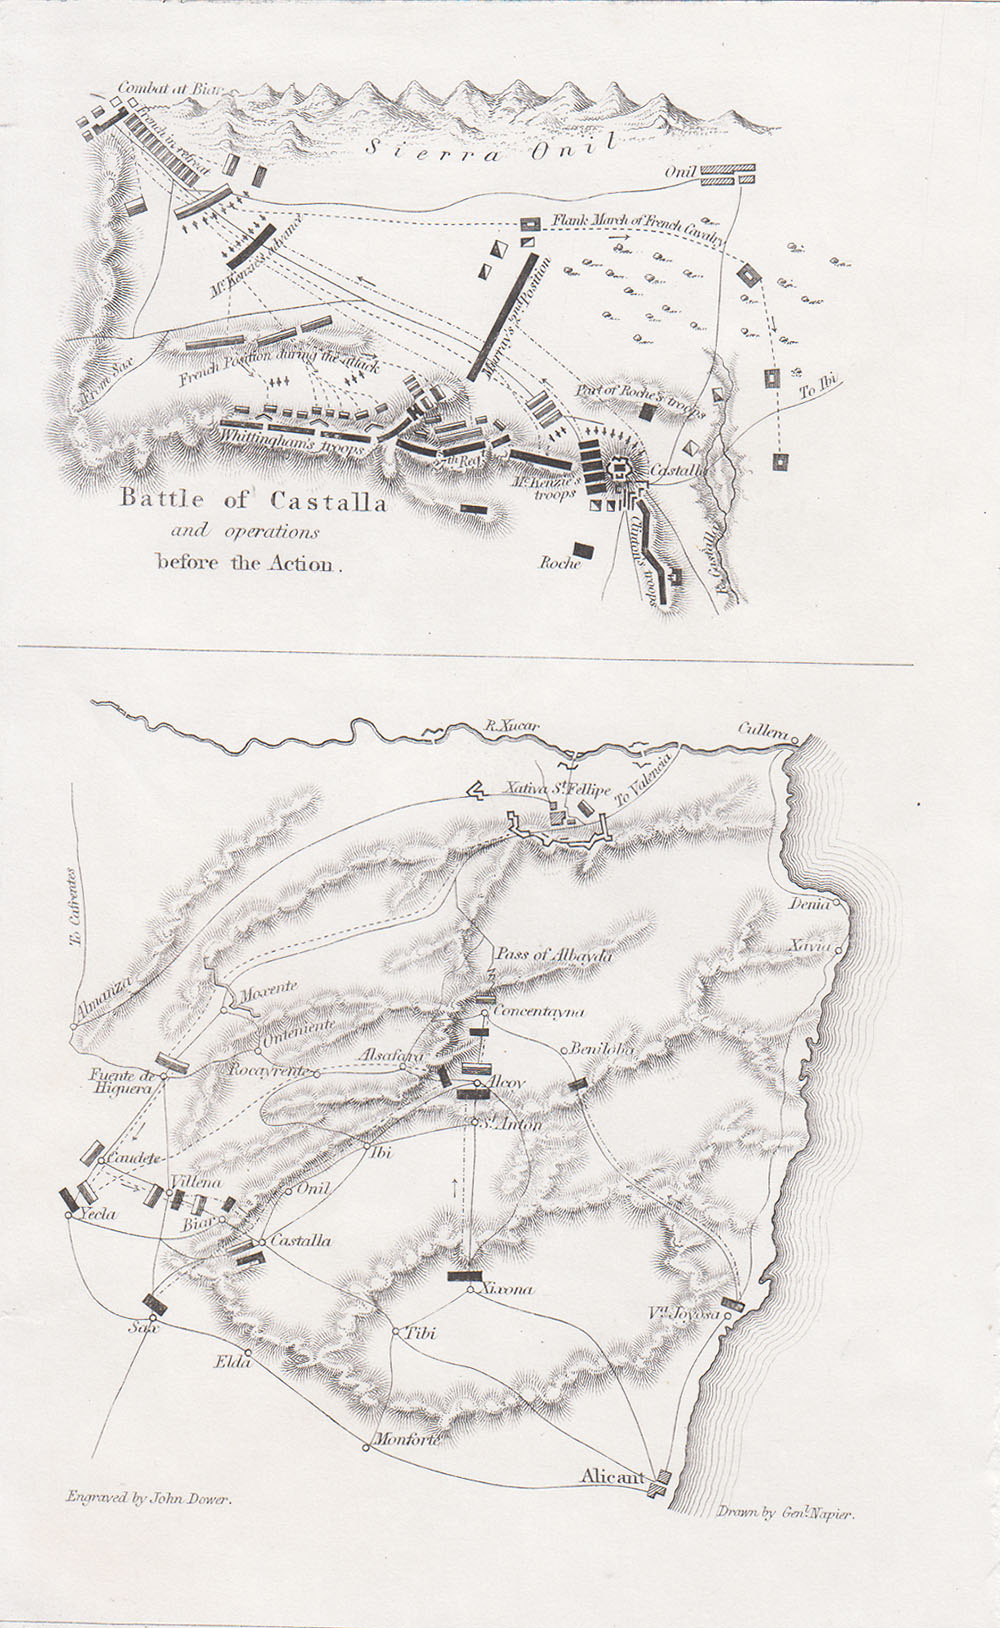 Battle of Castalla and operations before the Action